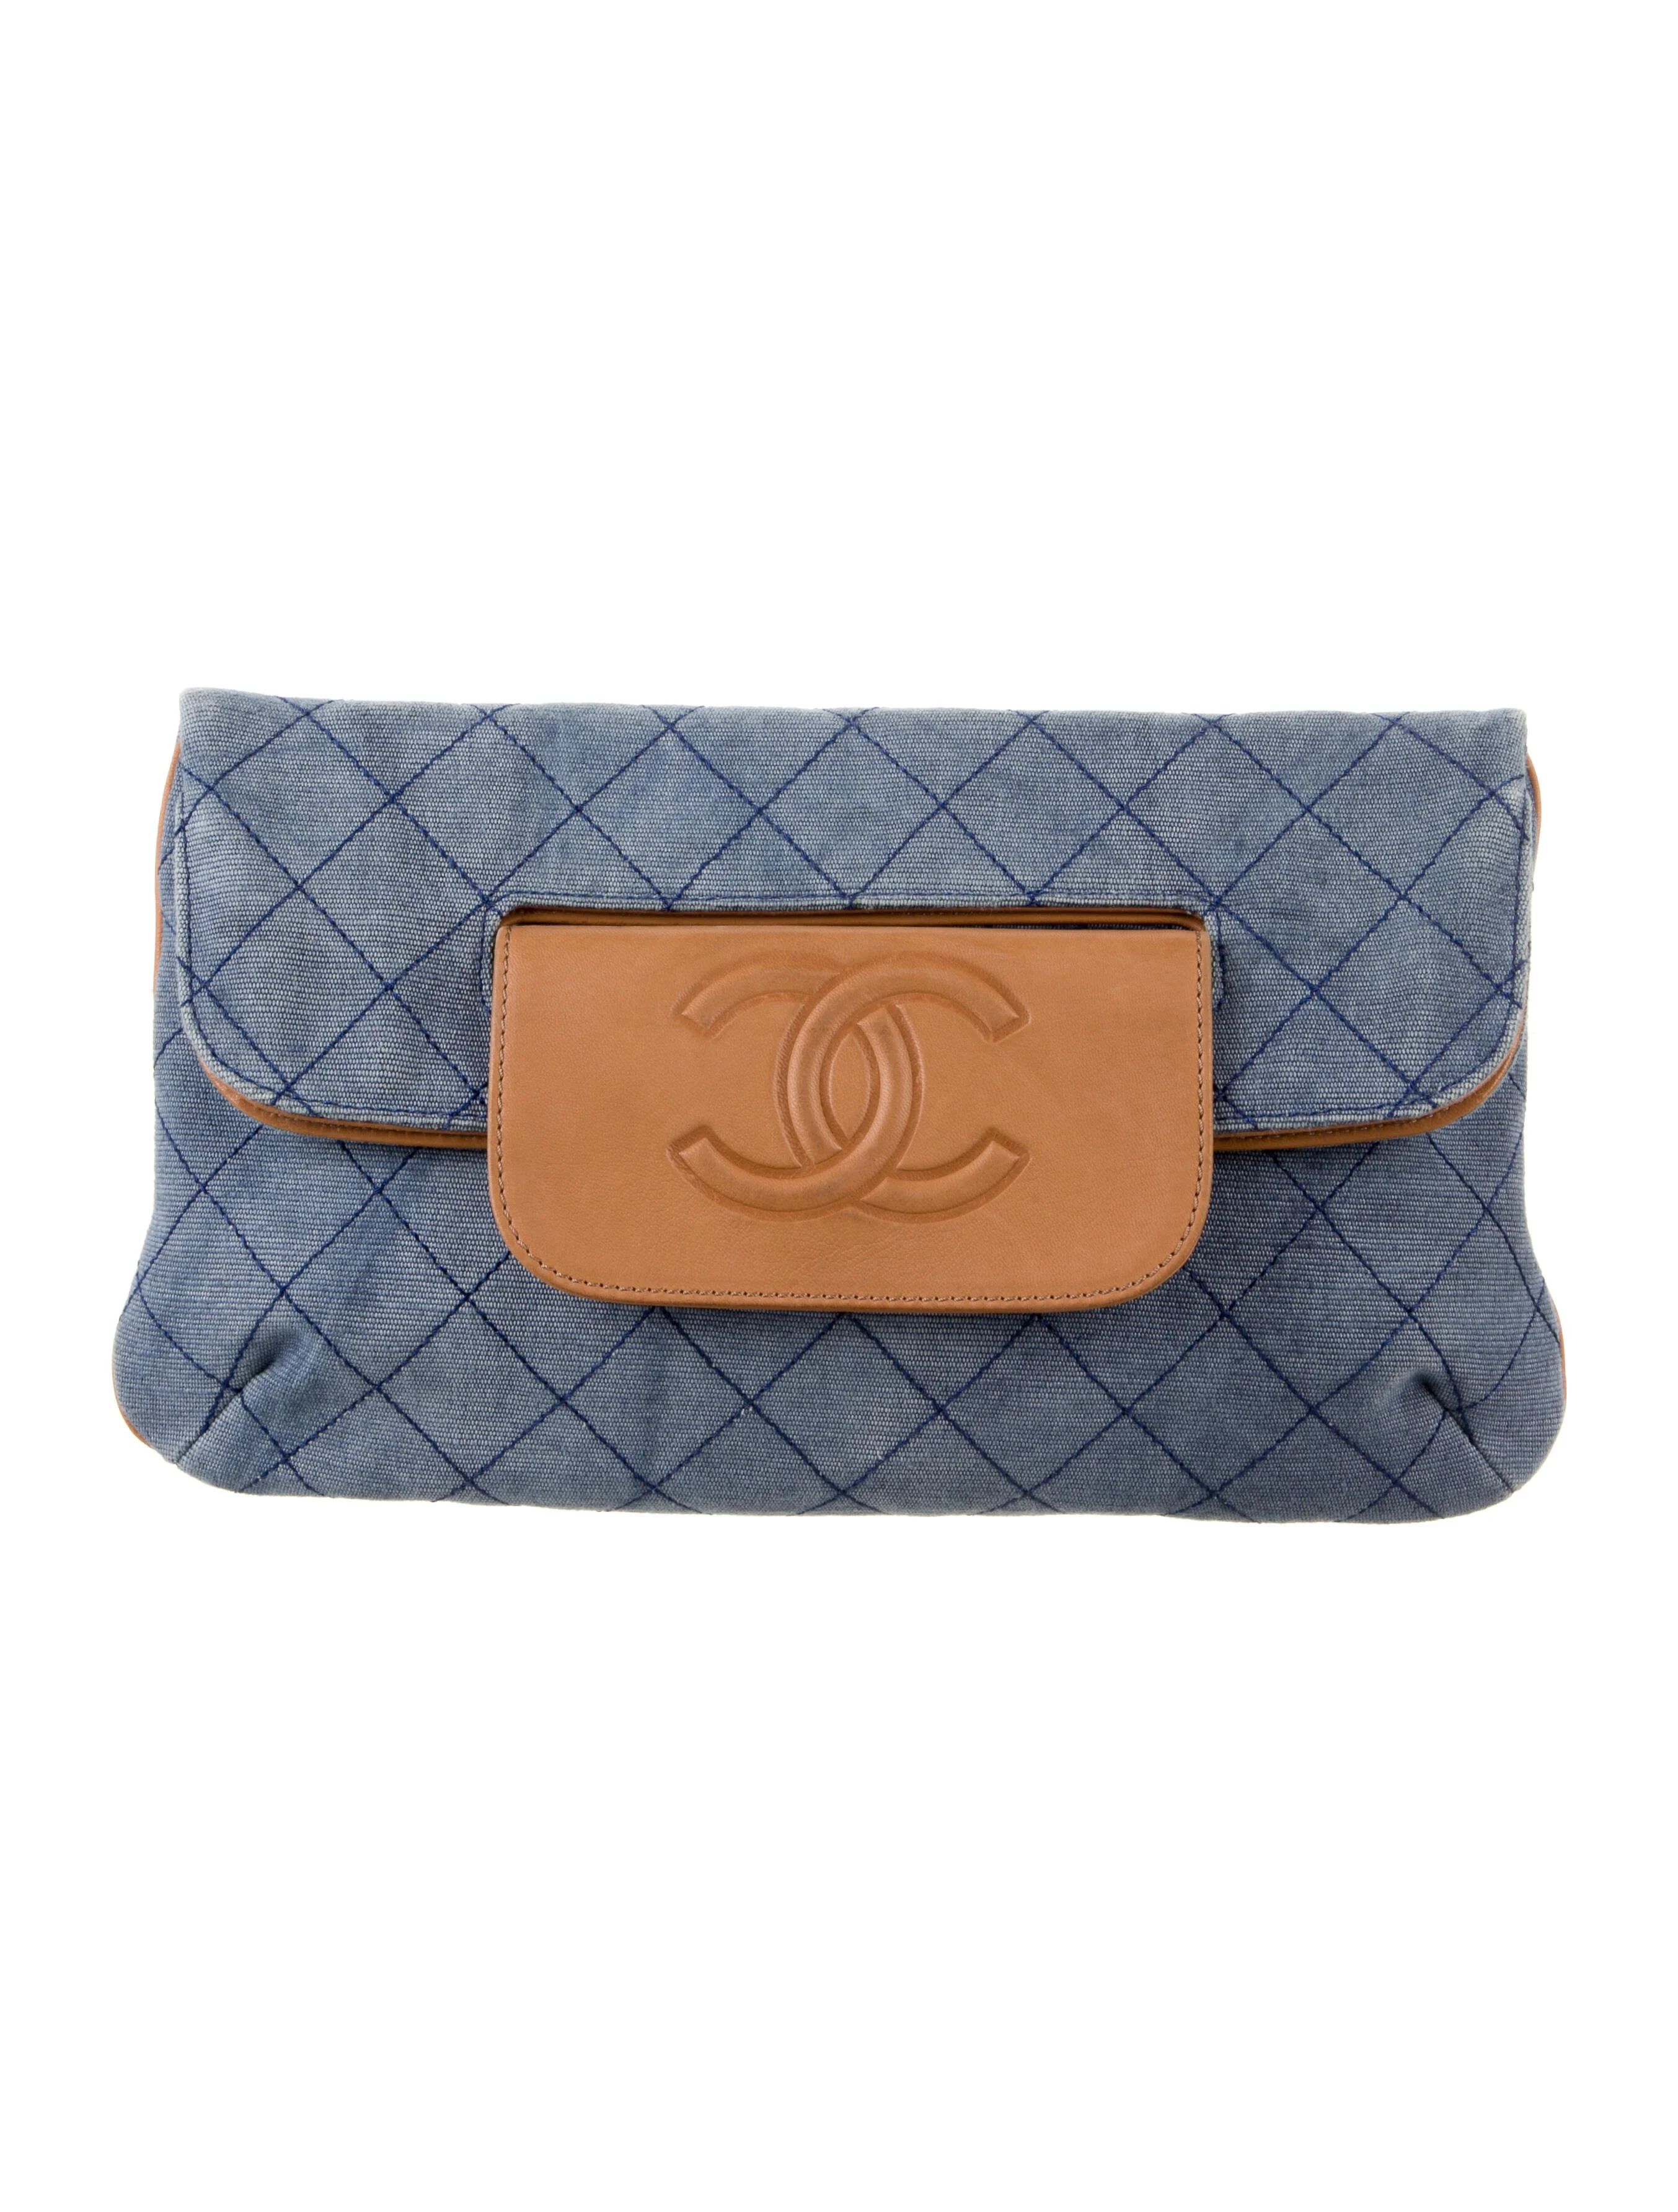 Denim CC Quilted Clutch | The RealReal